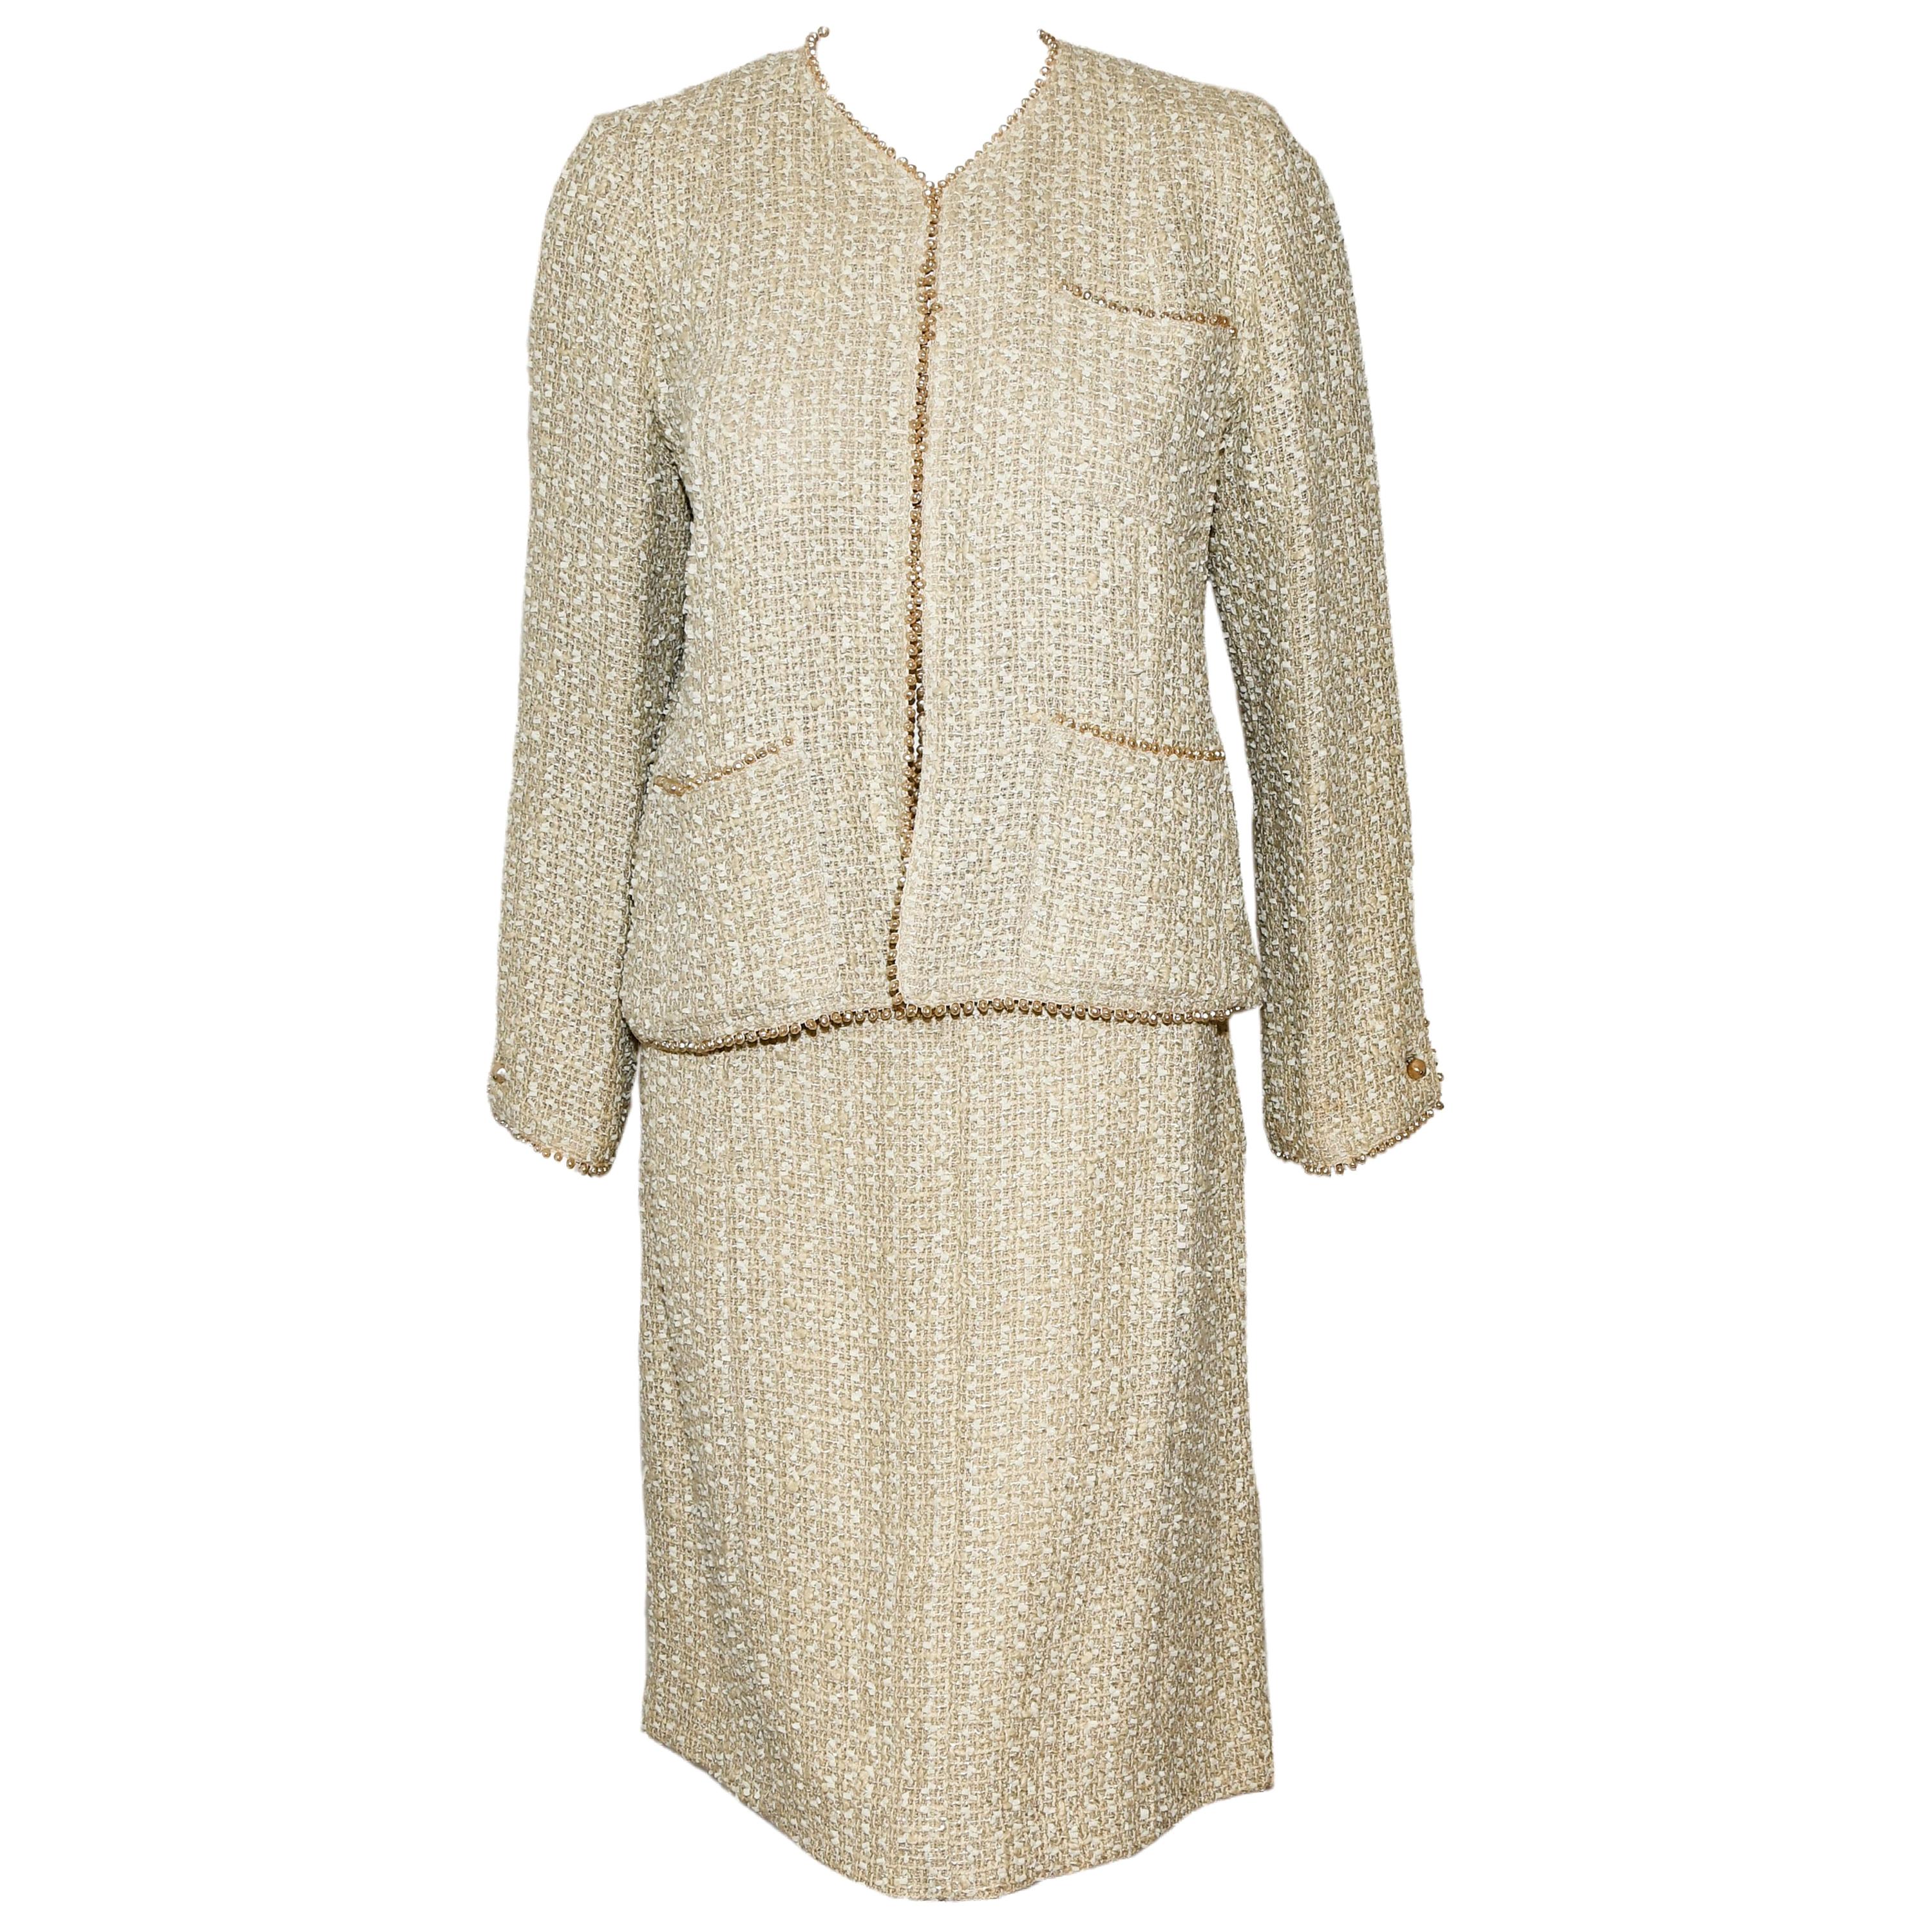 Consistent Chanel Nacar Beige Pearl Trimmed Spring '99 Skirt Suit 38 For Sale